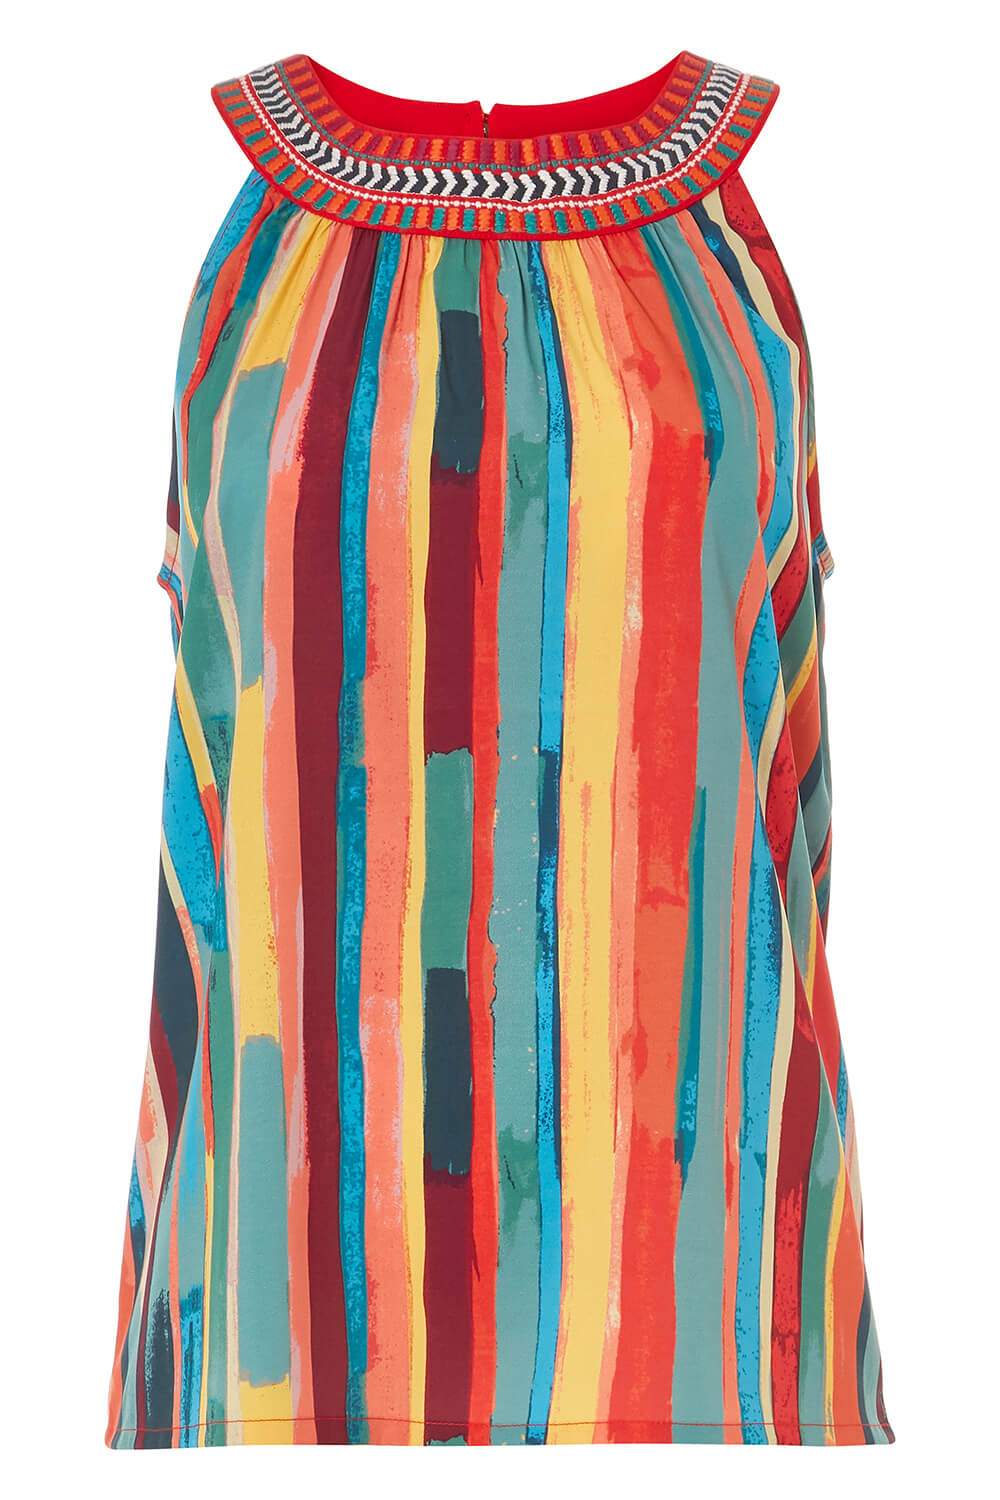 Multi  Stripe Print Embroidered Top, Image 4 of 4